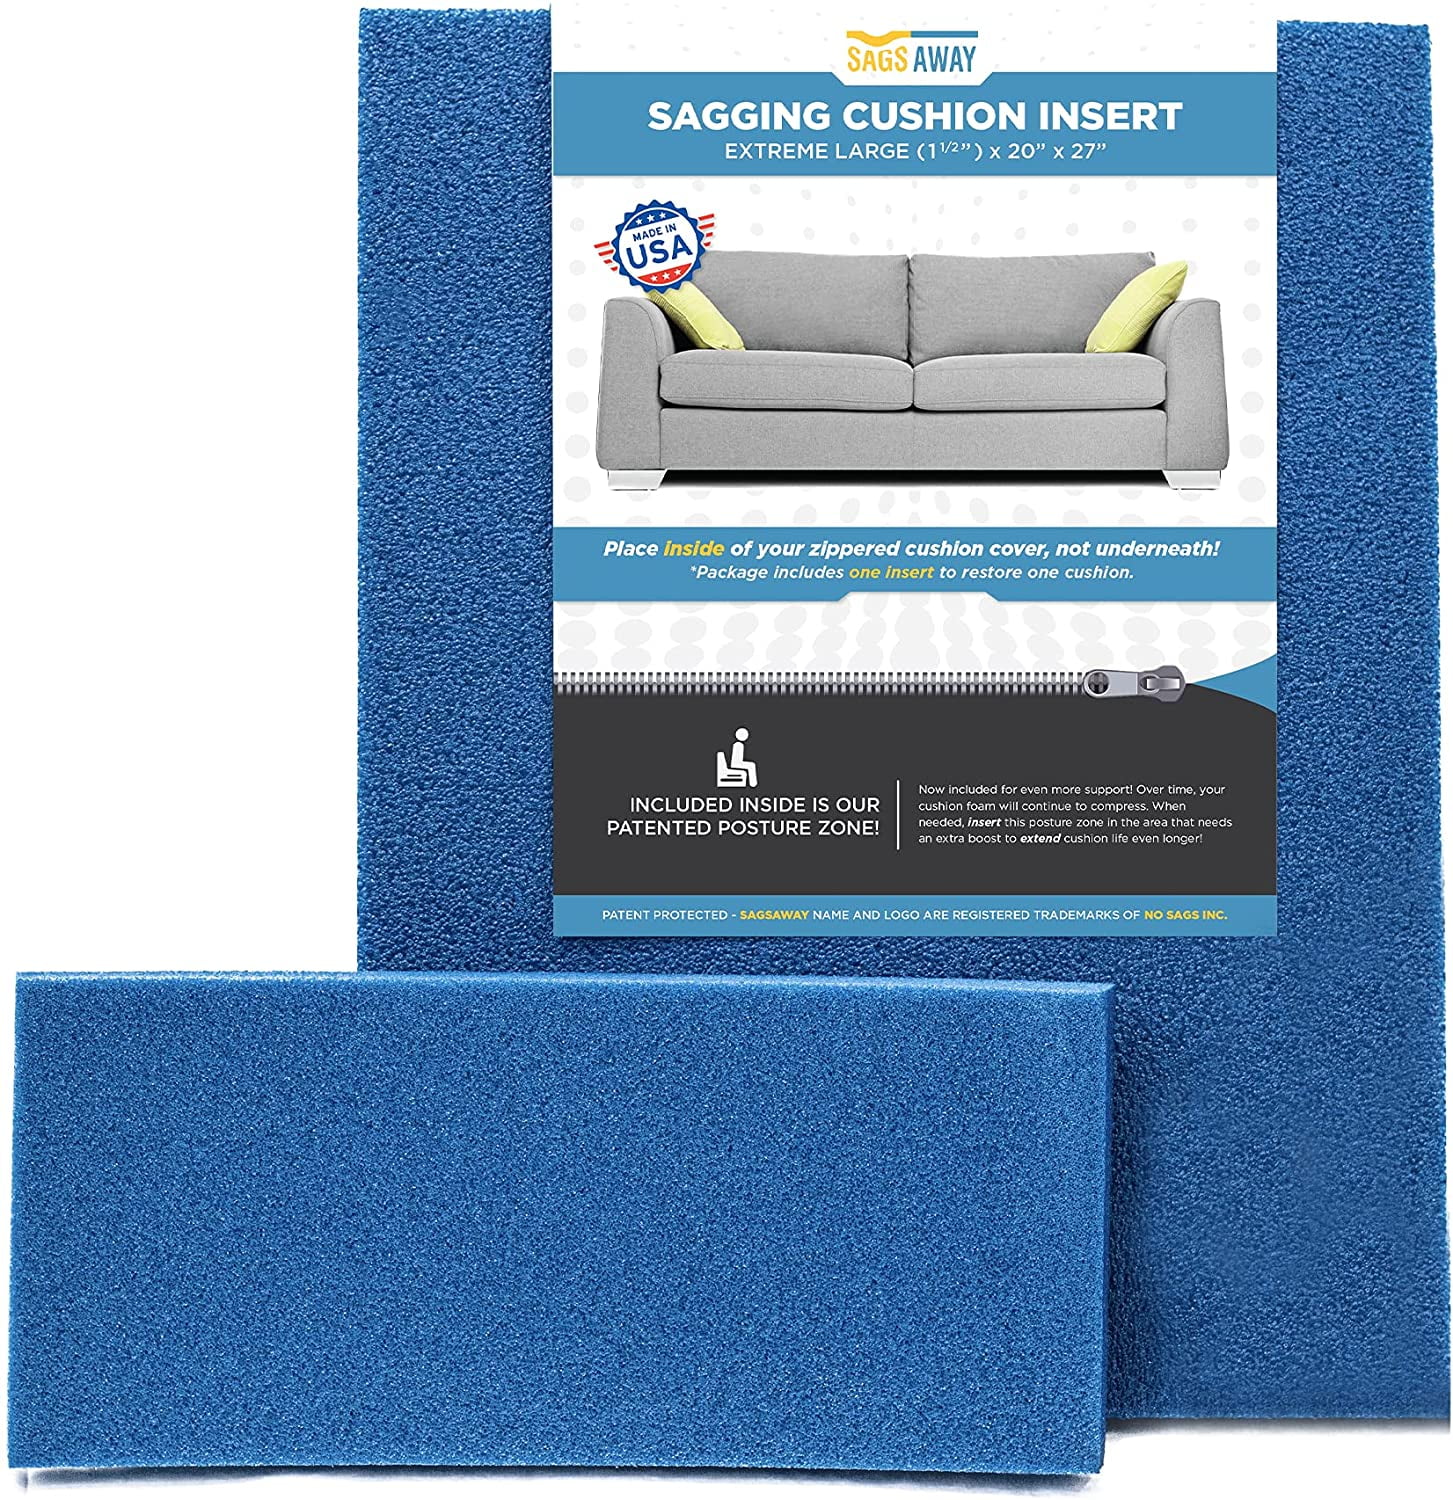  WSFSLJWDW 1 PCS Couch Cushion Inserts Support, Couch Supports  for Sagging Cushions, Couch Cushion Replacement for Sagging Seat,  19.8x19.8Inches (Blue) : Home & Kitchen